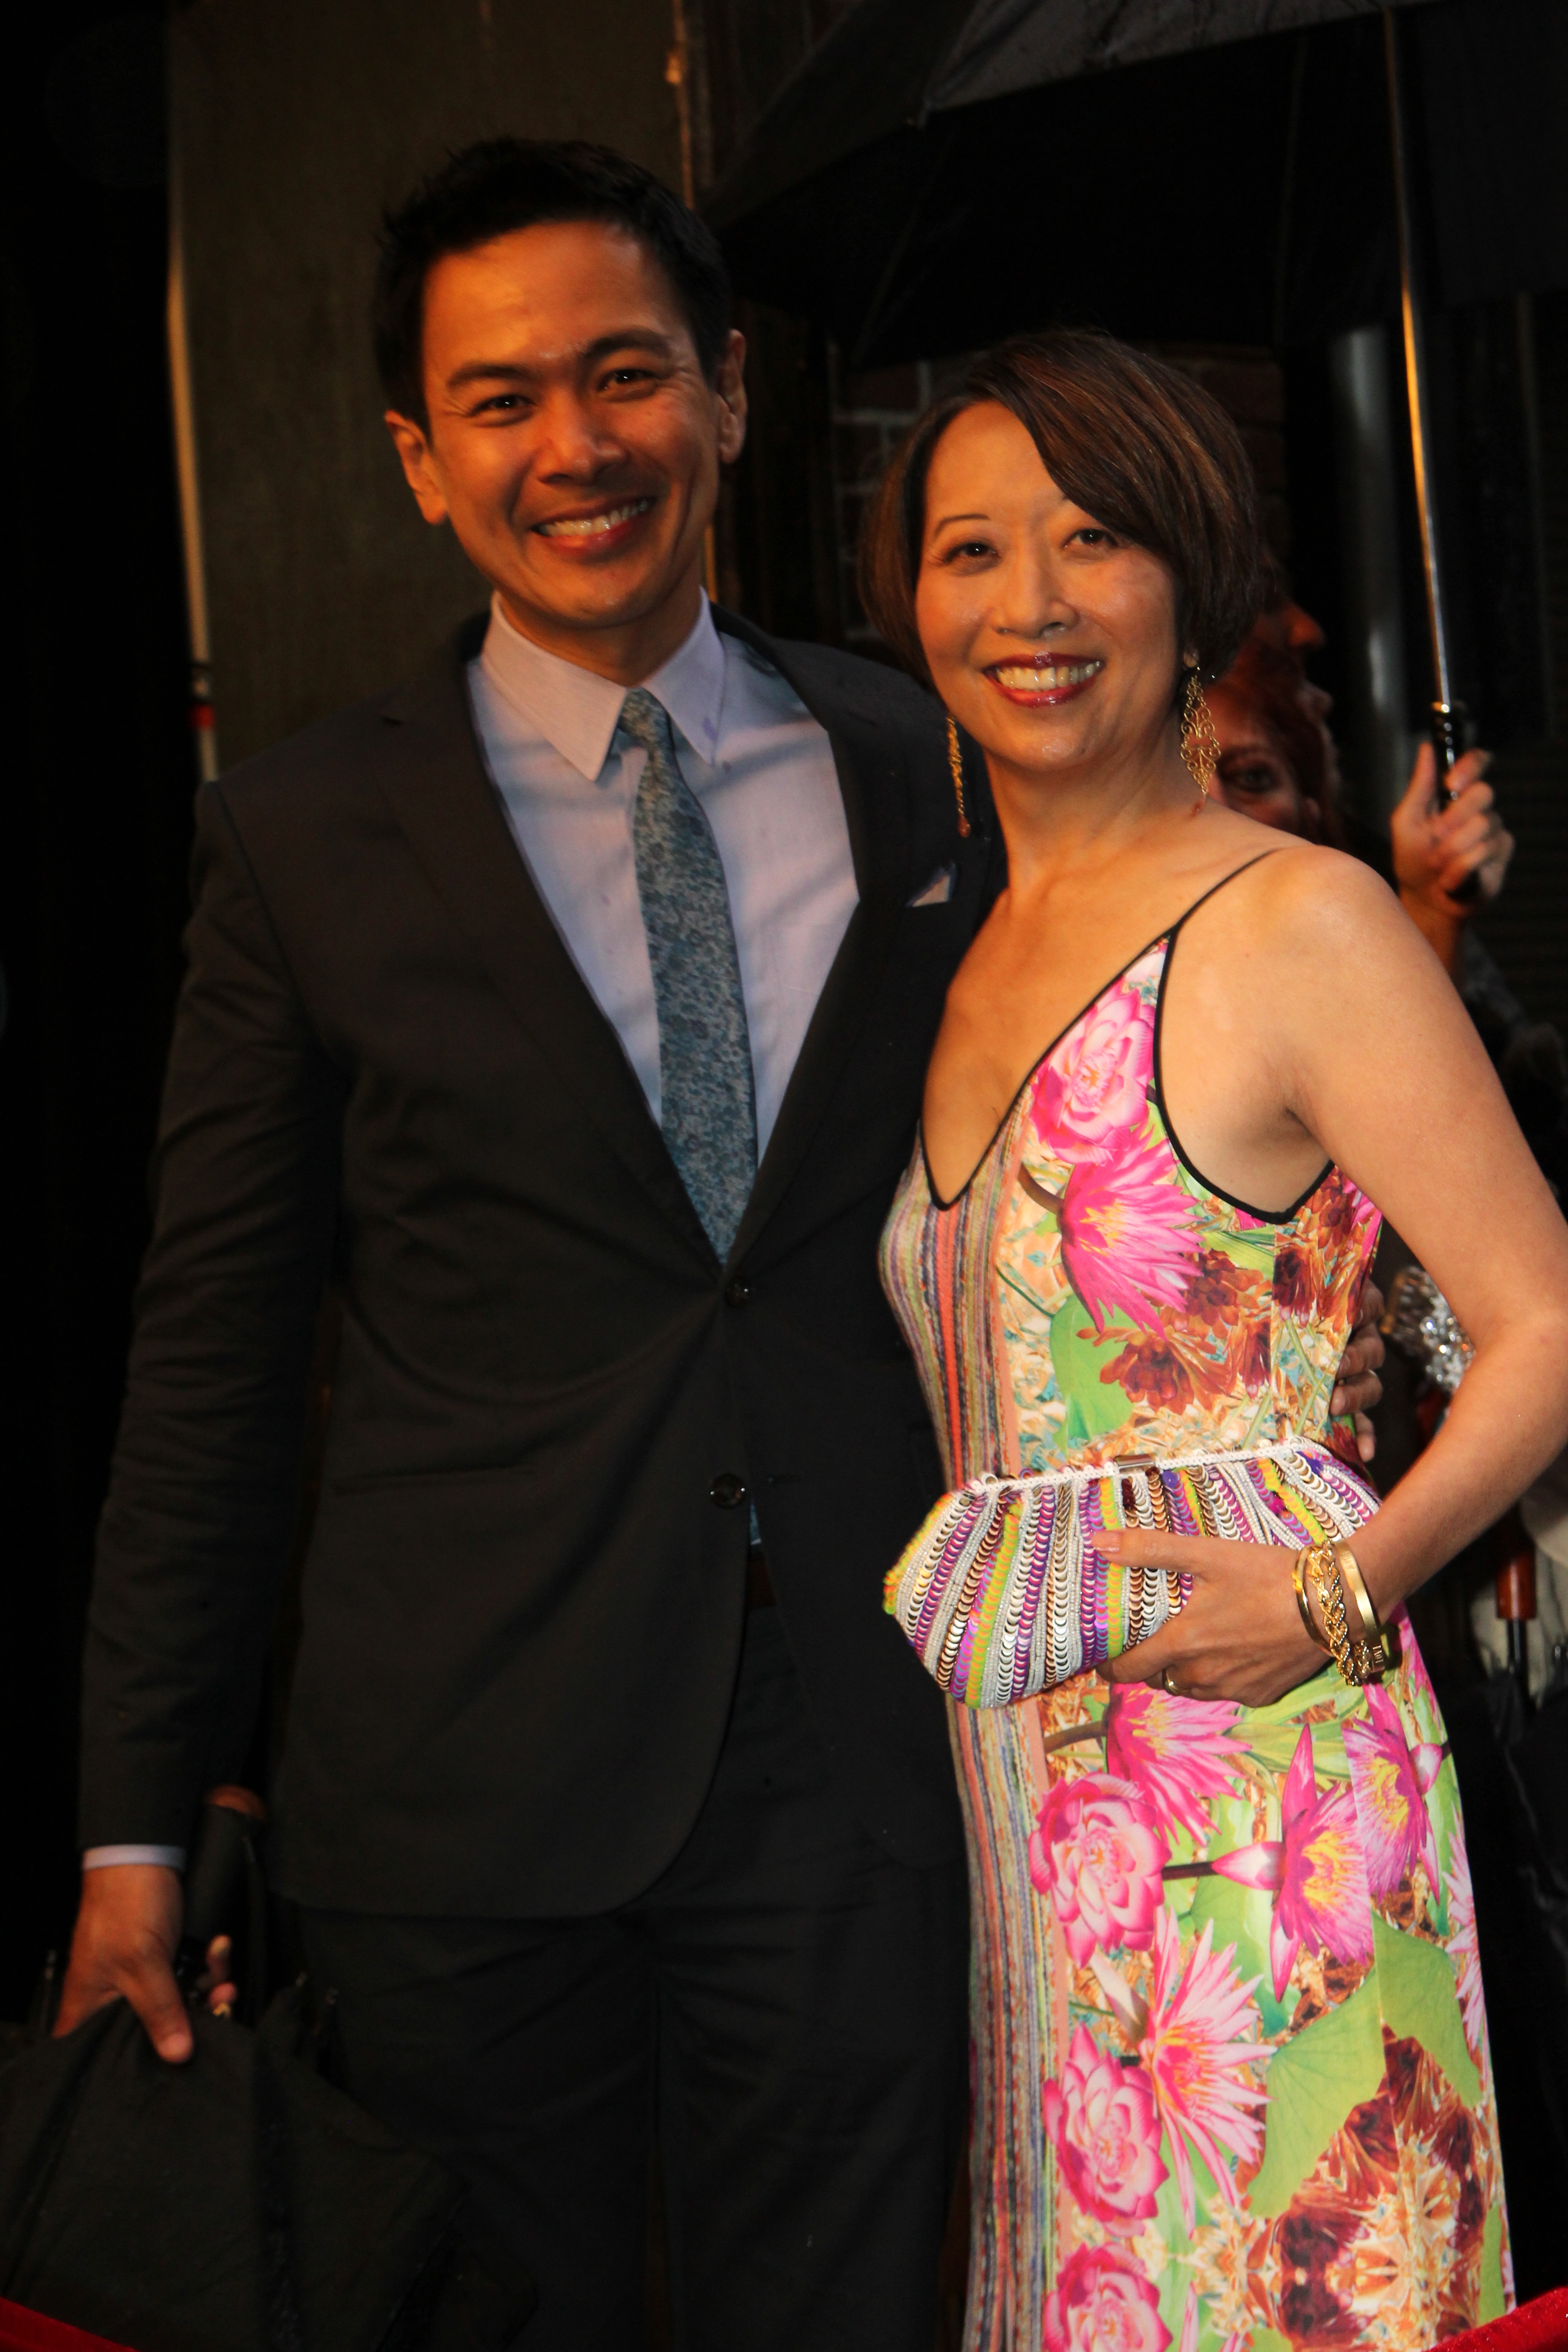 Jeanne Sakata at the 2013 Drama Desk Awards with Joel de la Fuente, nominee for Outstanding Solo Performance in Jeanne's play, HOLD THESE TRUTHS, inspired by the life of Gordon Hirabayashi